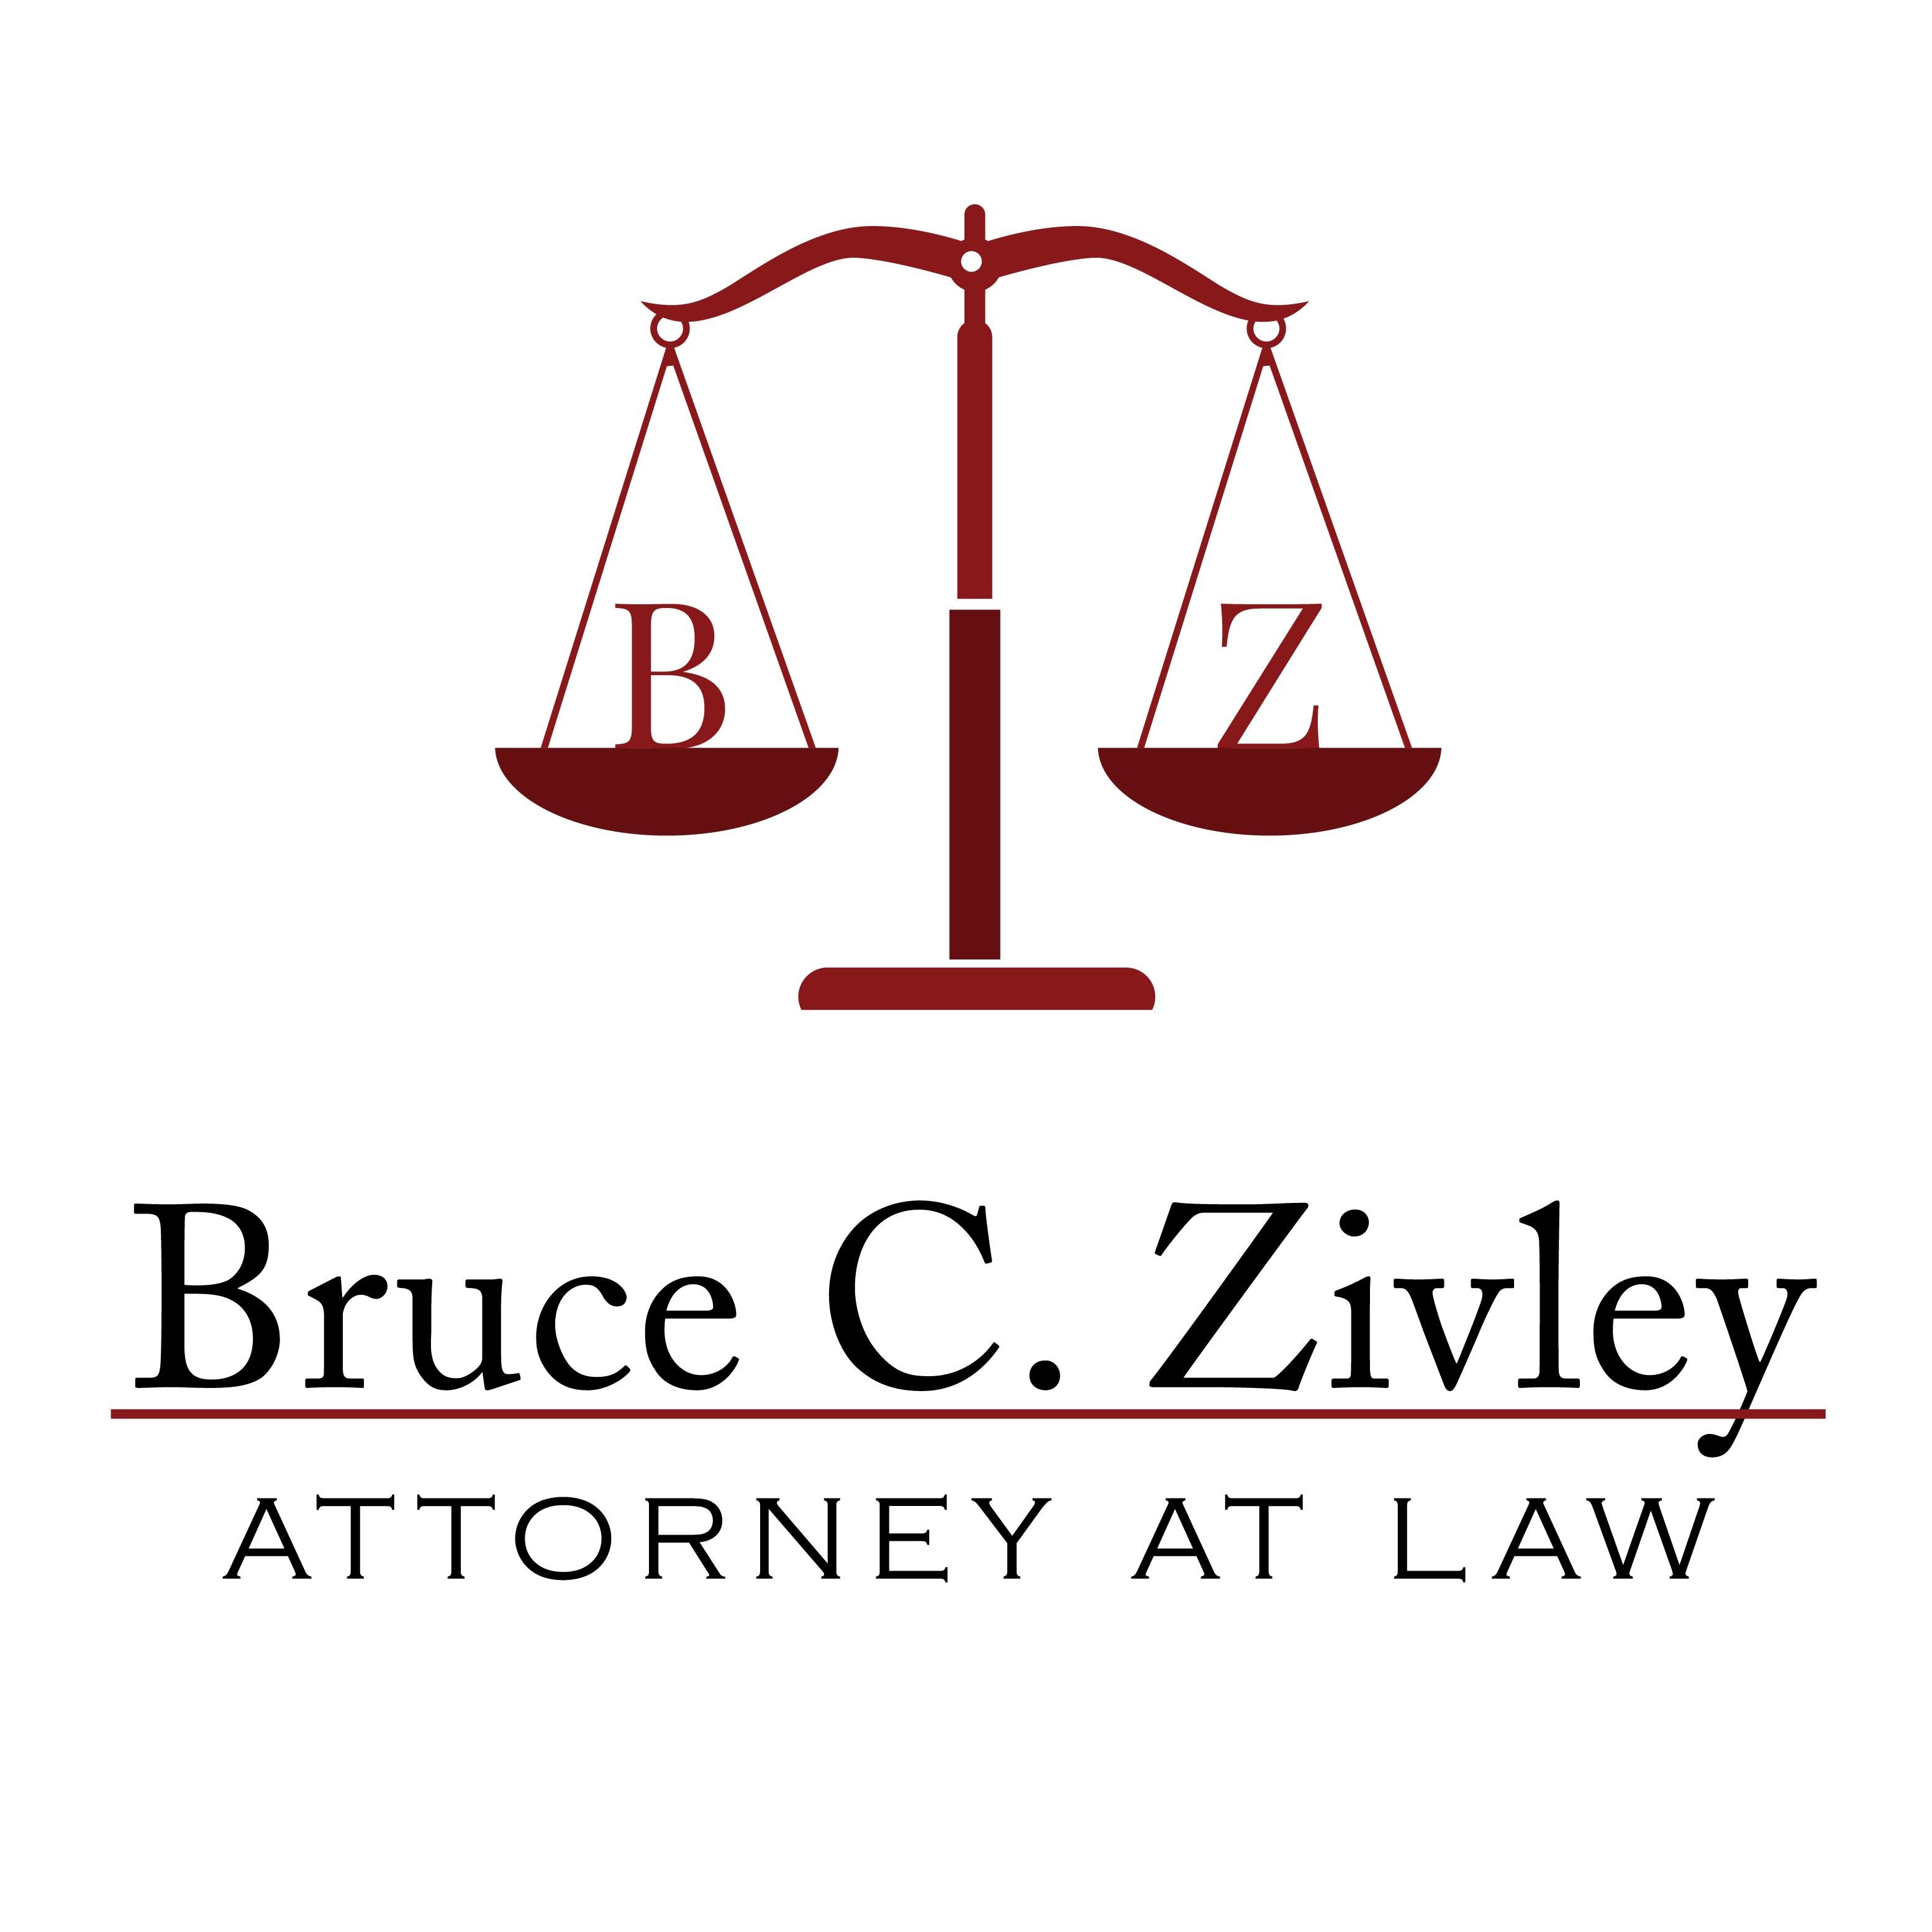 Bruce C. Zivley, Attorney at Law